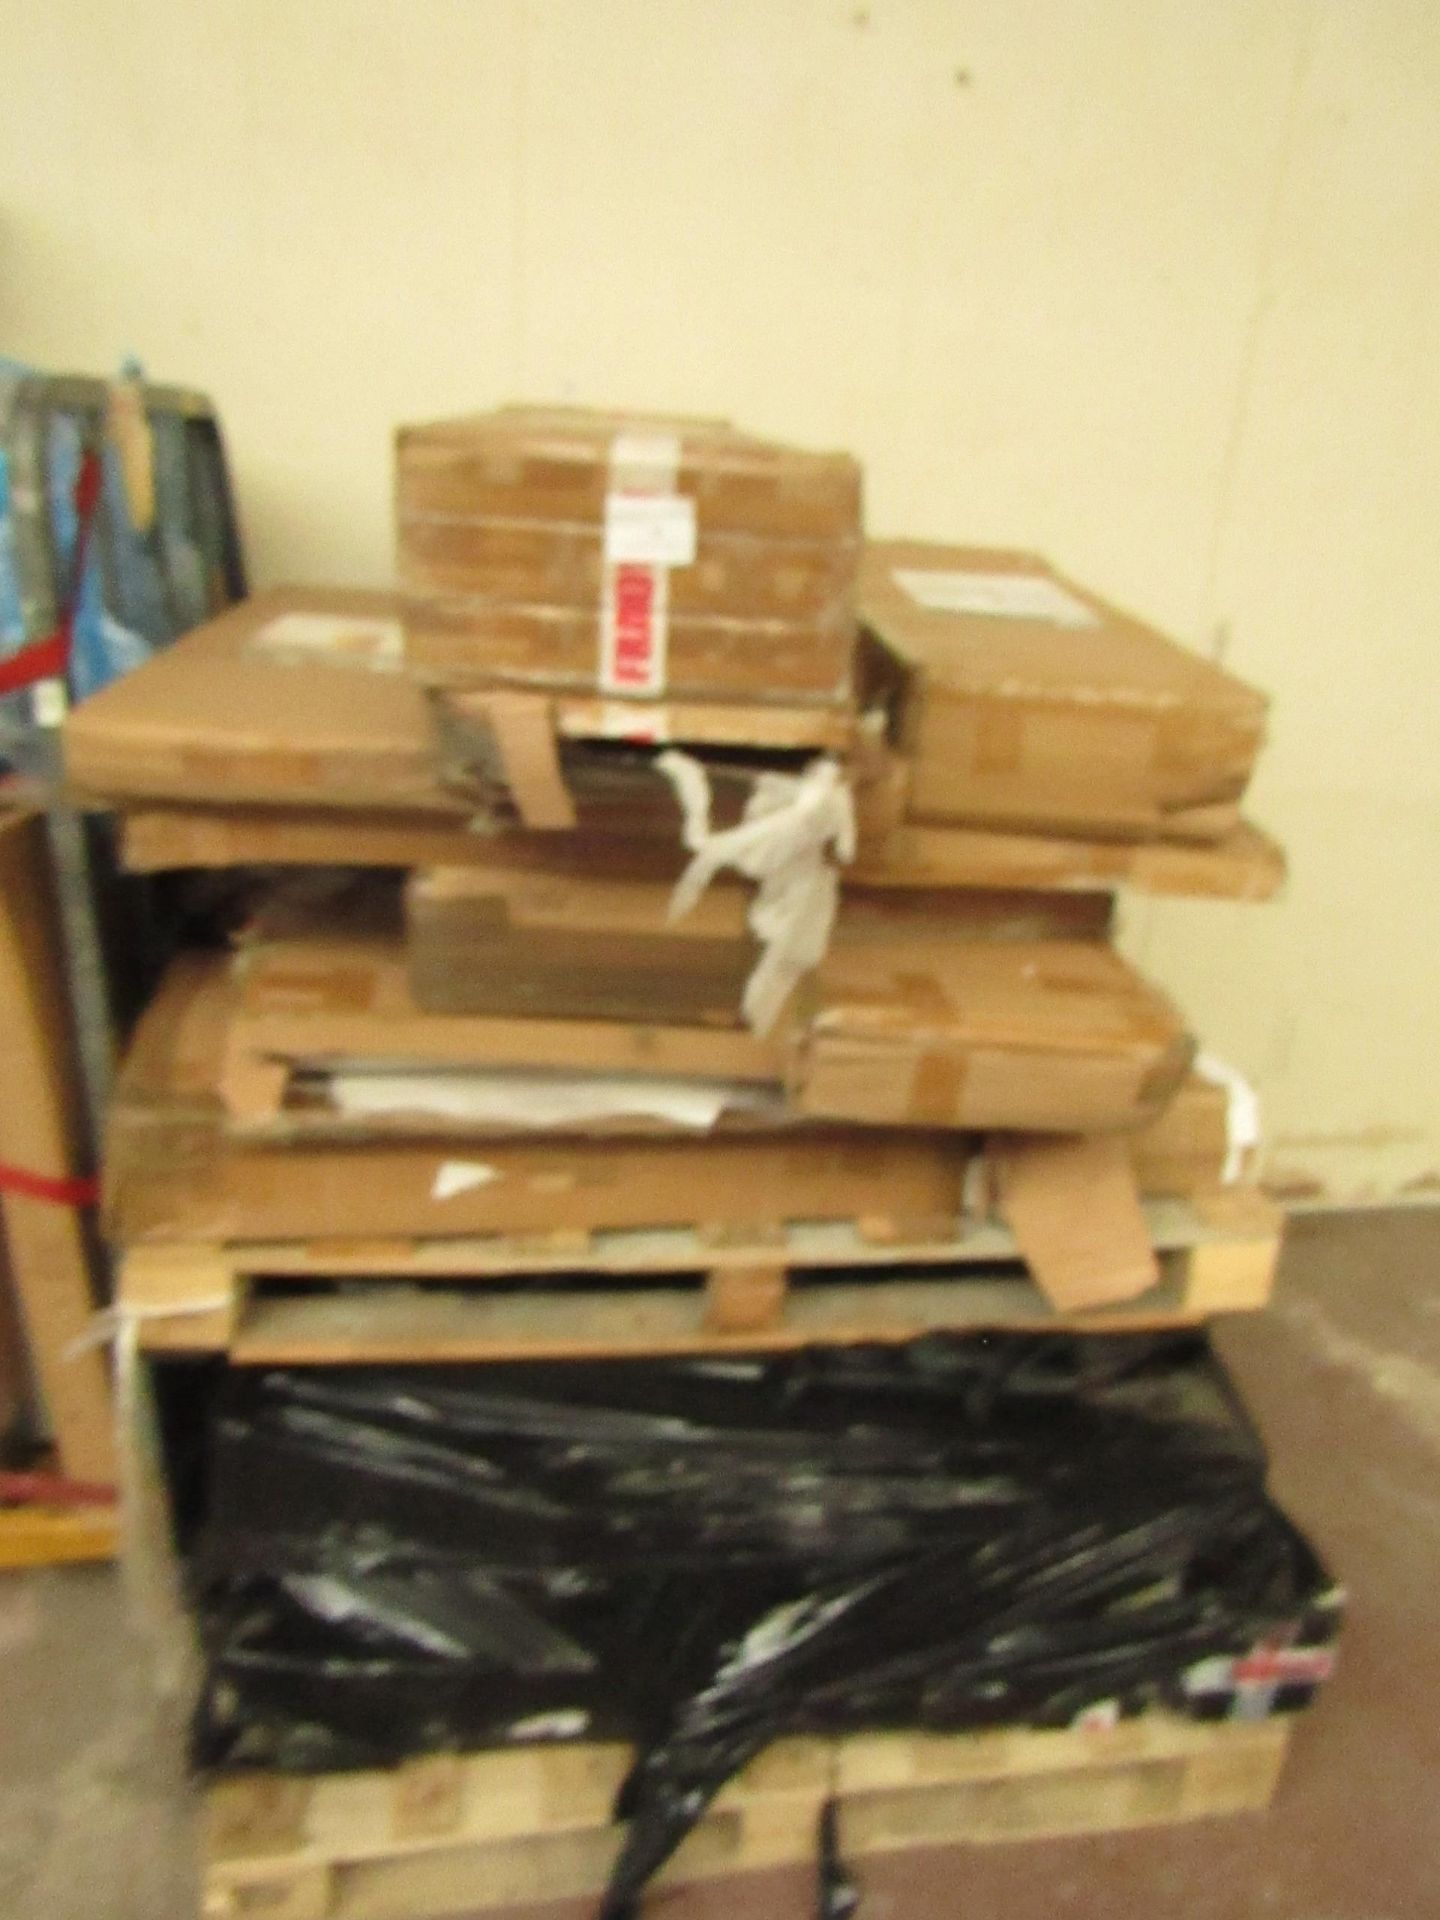 A Pallet, approx 5ft to 6ft tall of raw customer household returns from a large online retailer,